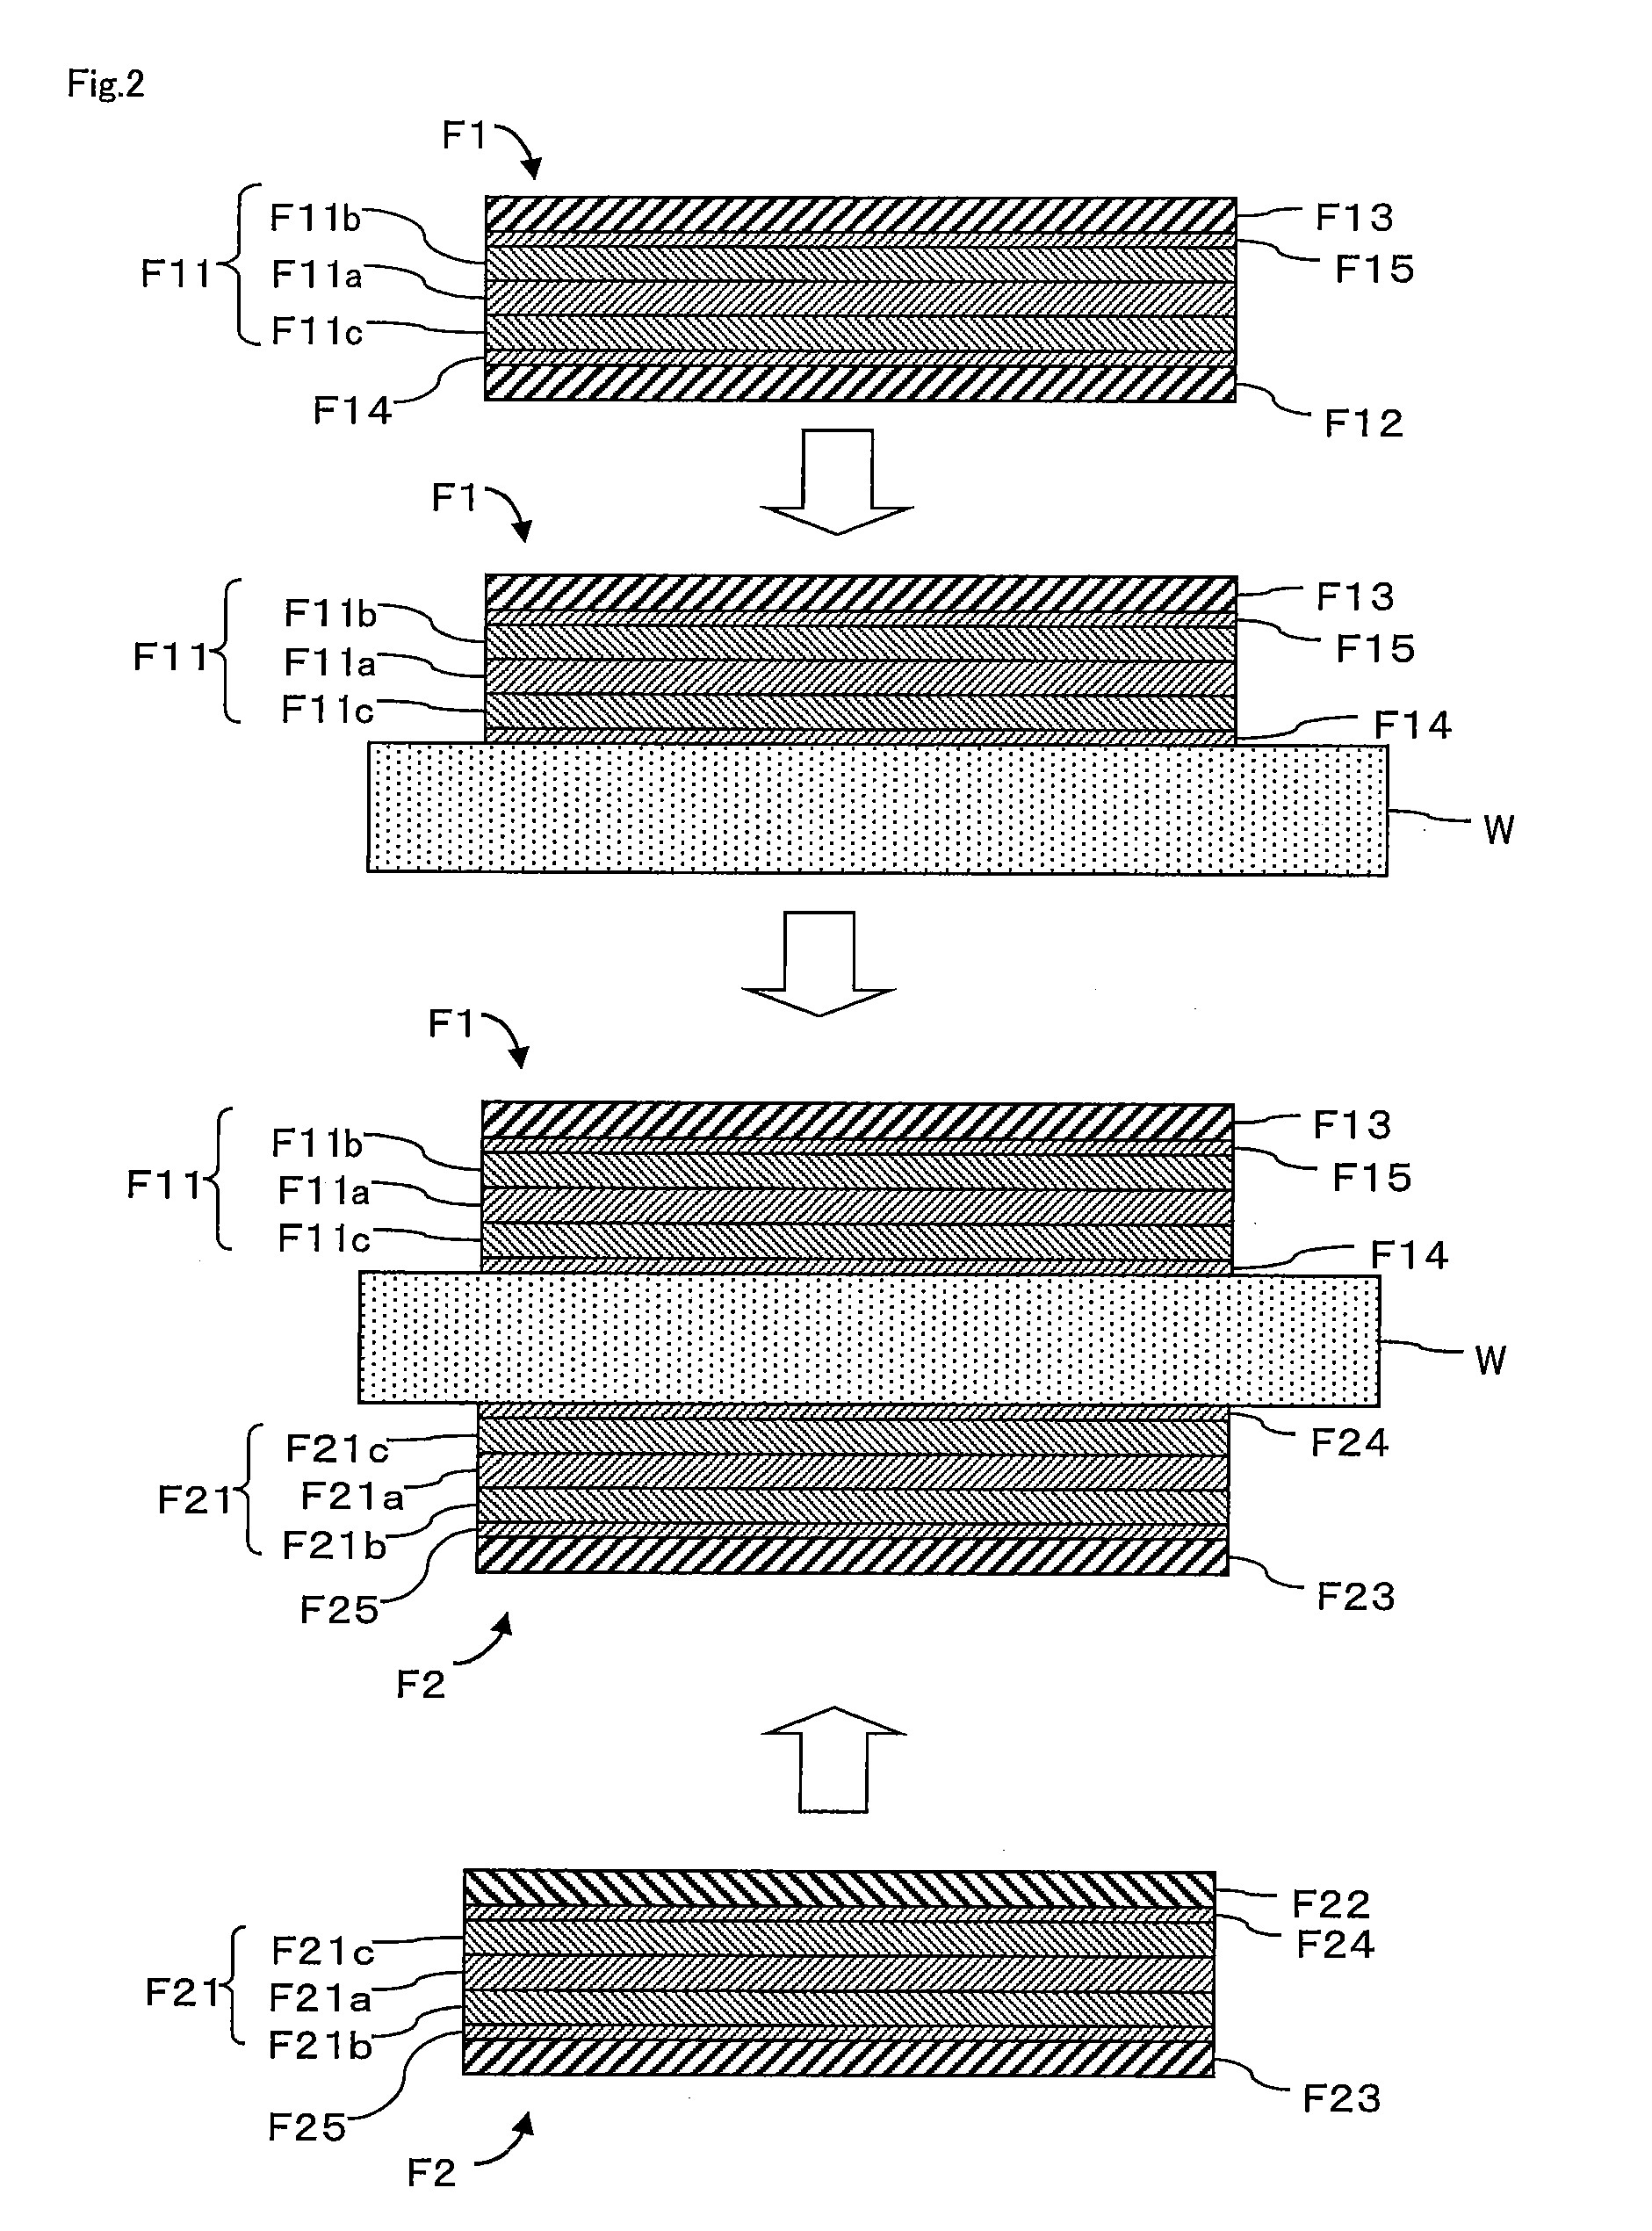 Optical display device manufacturing system and method for manufacturing optical display device